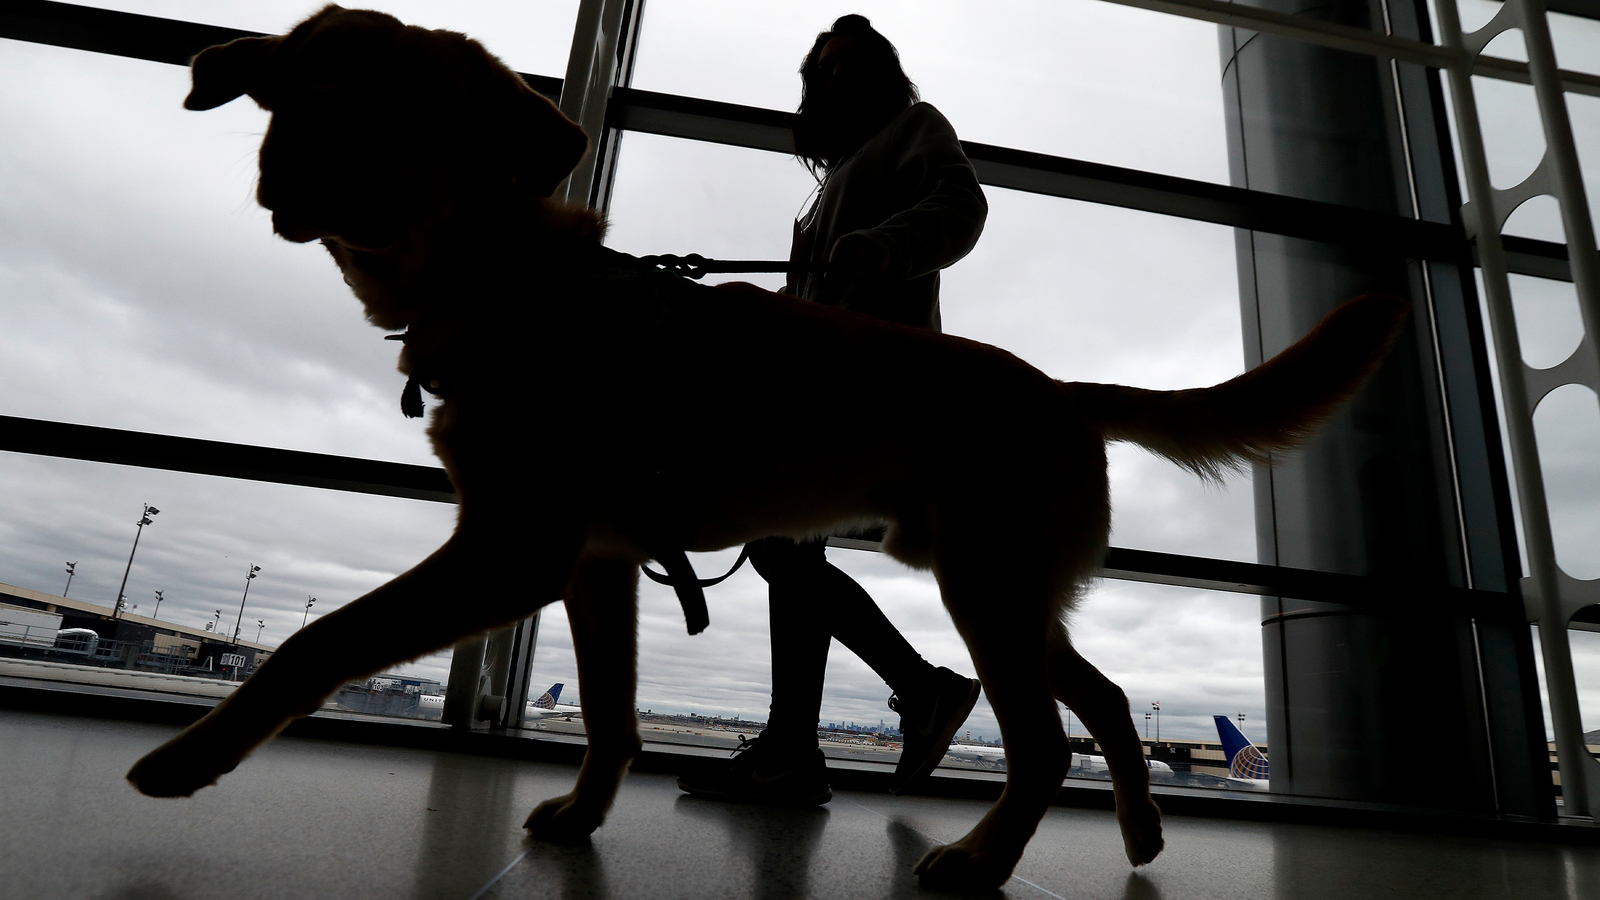 New dog import rules: Dogs entering US must be 6 months old and microchipped to prevent spread of rabies, new rules say [Video]